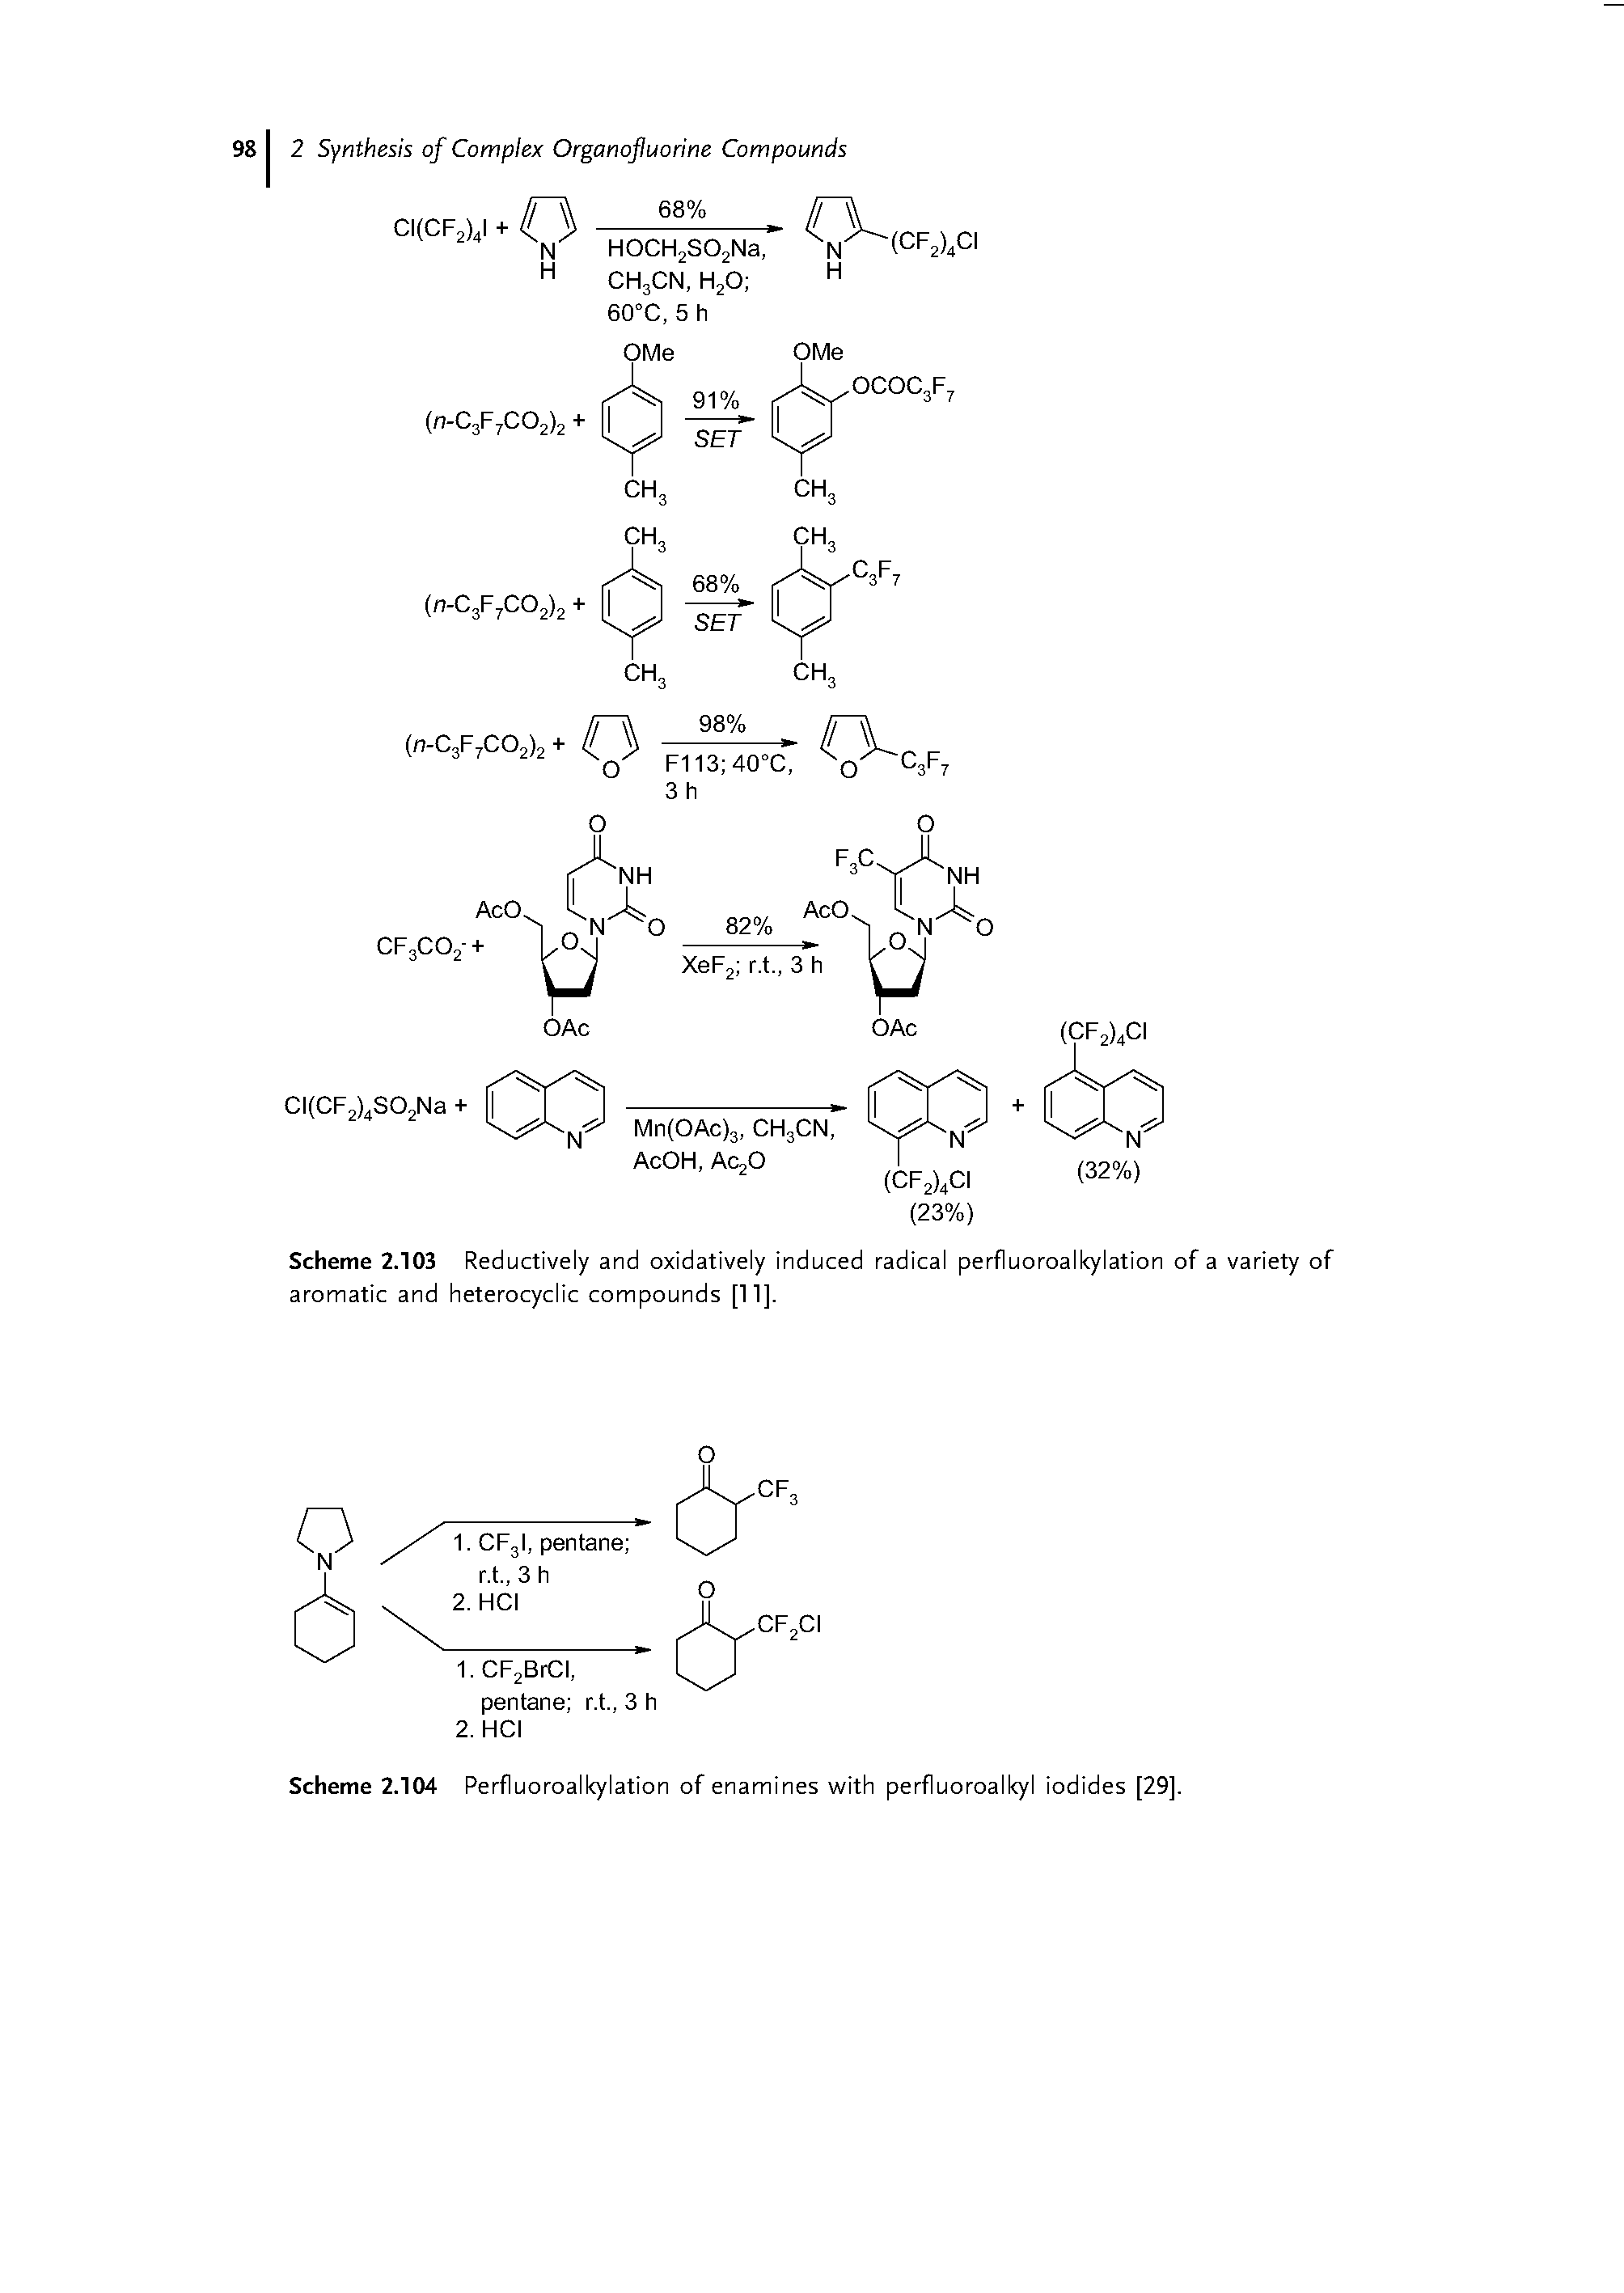 Scheme 2.103 Reductively and oxidatively induced radical perfluoroalkylation of a variety of aromatic and heterocyclic compounds [11].